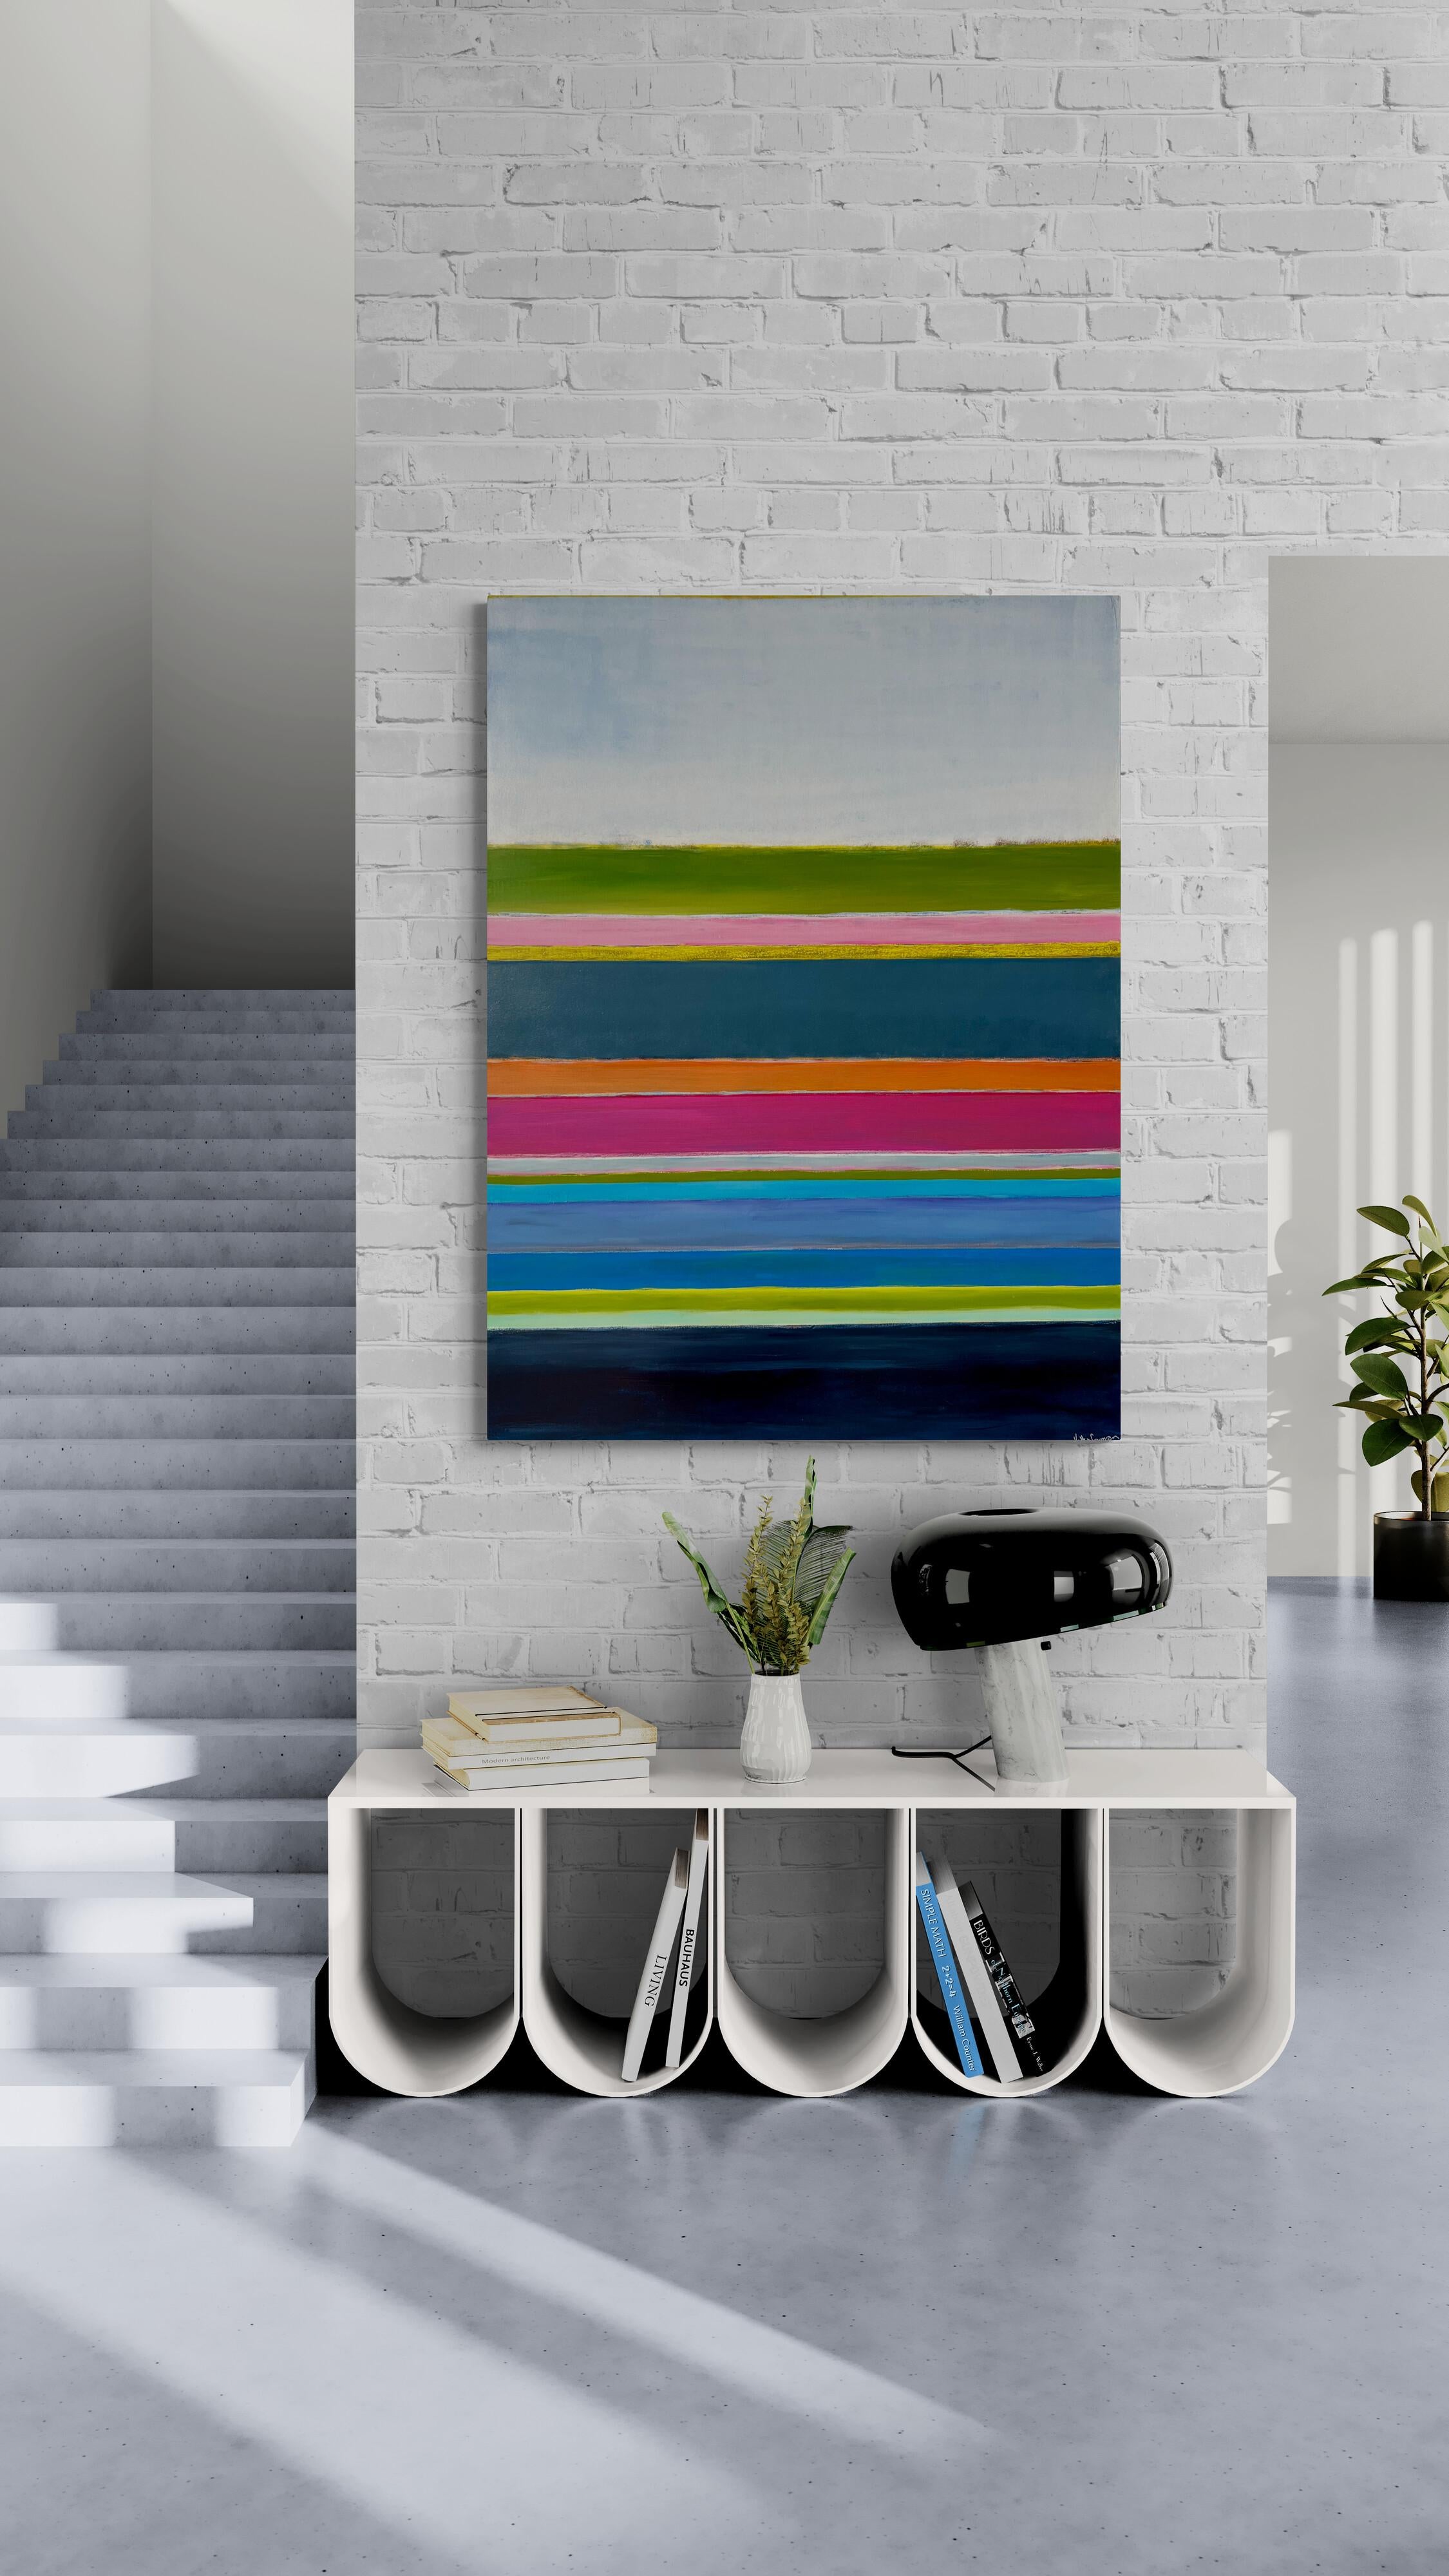 Kelley Carman
I’ve Earned My Stripes (Abstract, Geometric, Pattern, Stripes, Blue, Pink, Green, Orange, Yellow)
Acrylic and Oil Stick
Year: 2022
Size: 48x36x1.5in
Signed
COA provided 
Ref.: 924802-2038

Tags: Abstract, Geometric, Pattern, Stripes,